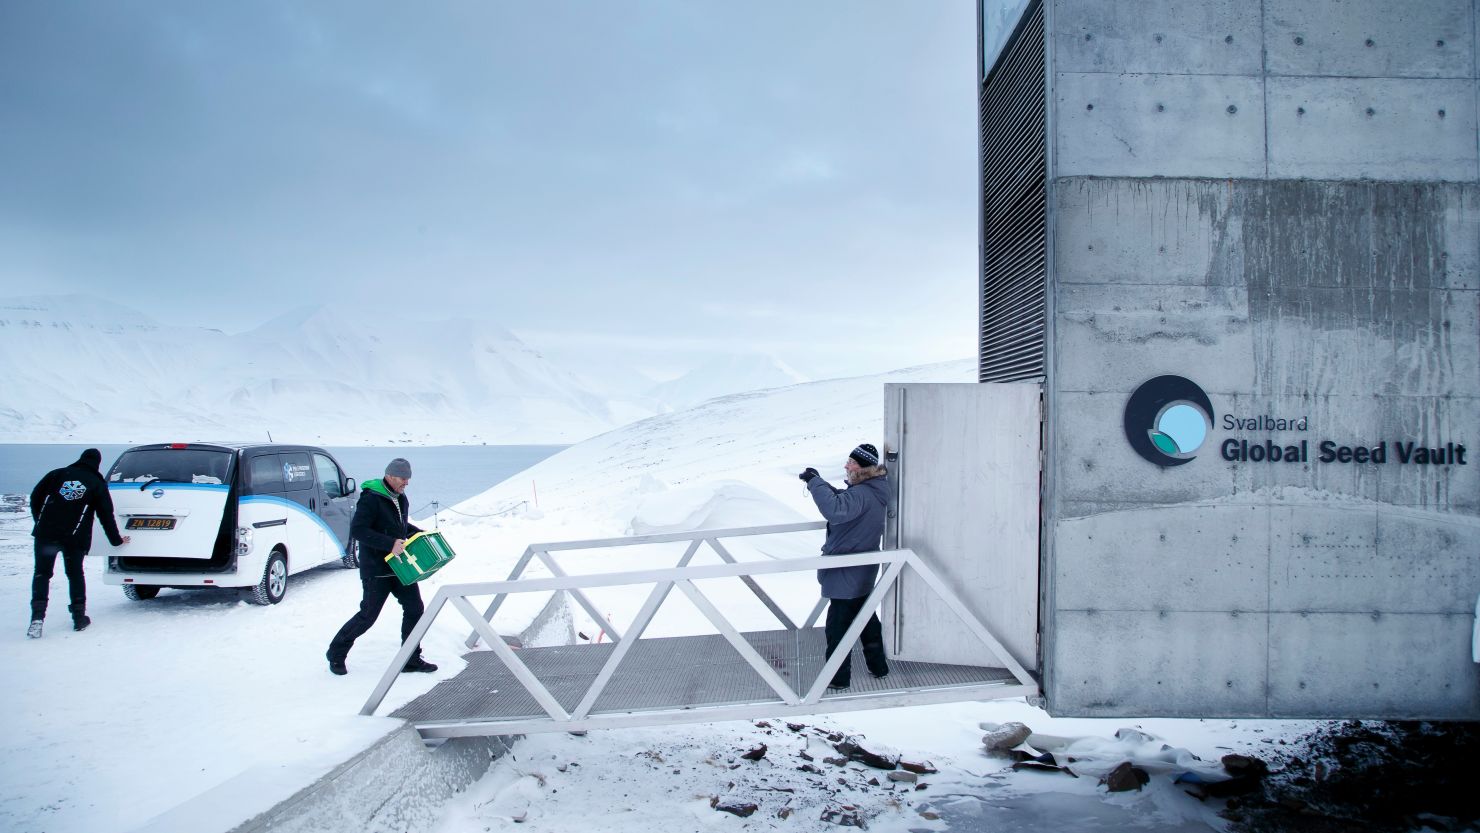 Like the nearby Global Seed Vault, the new bunker is located underground on a remote Arctic island.